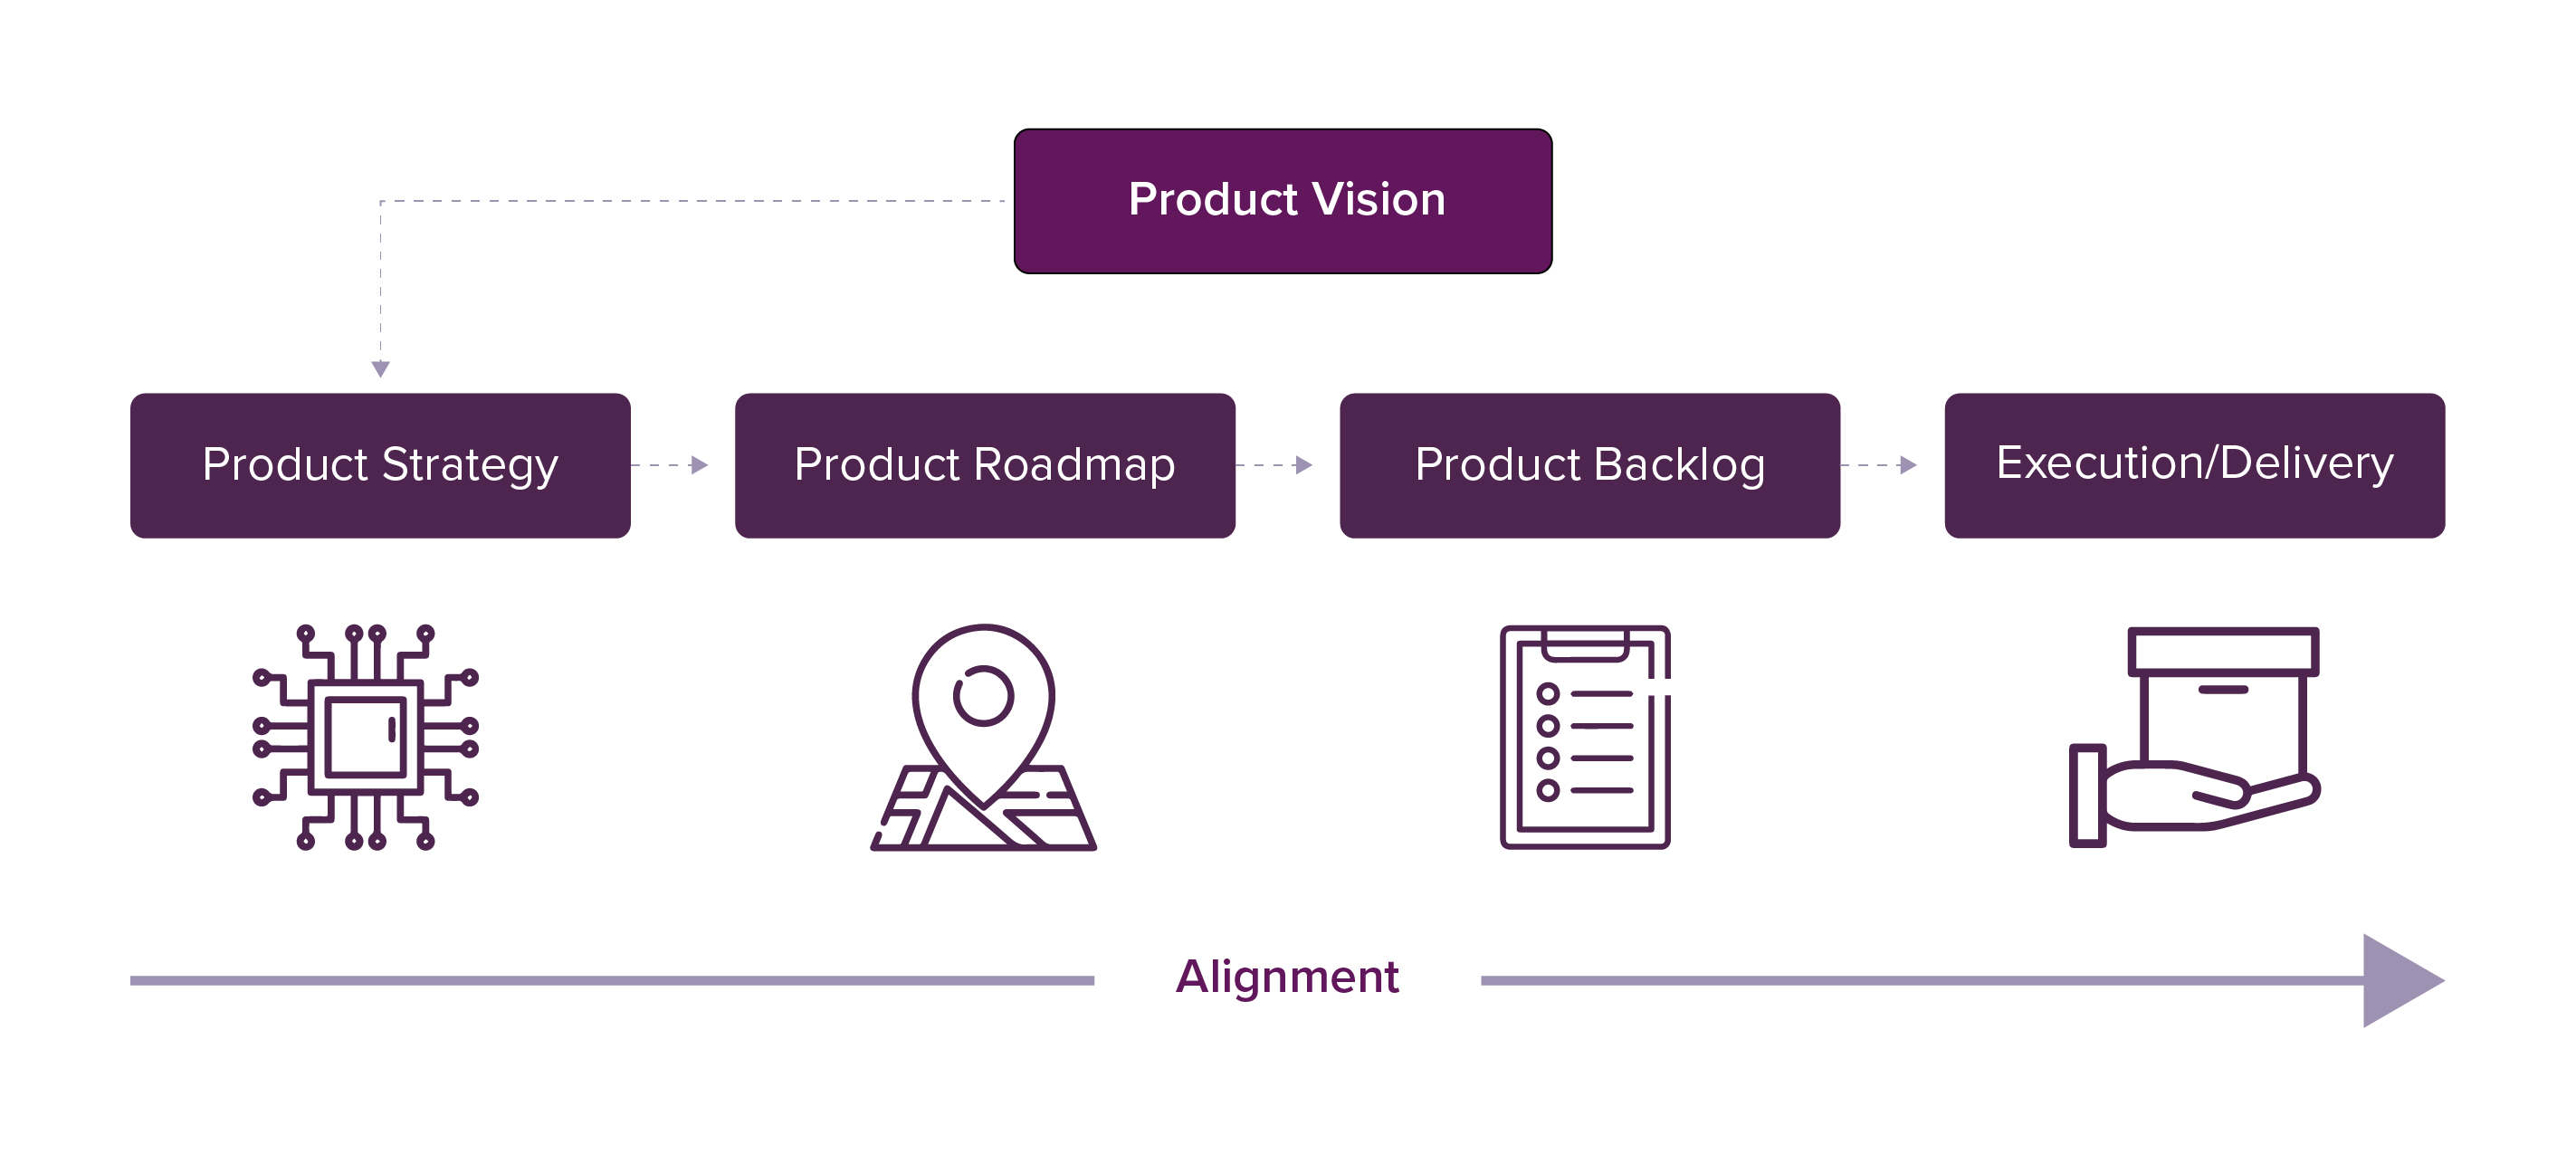 Visualized roadmap from Product Vision to Product Strategy to Product Roadmap to Product Backlog and finally to Execution and Delivery.